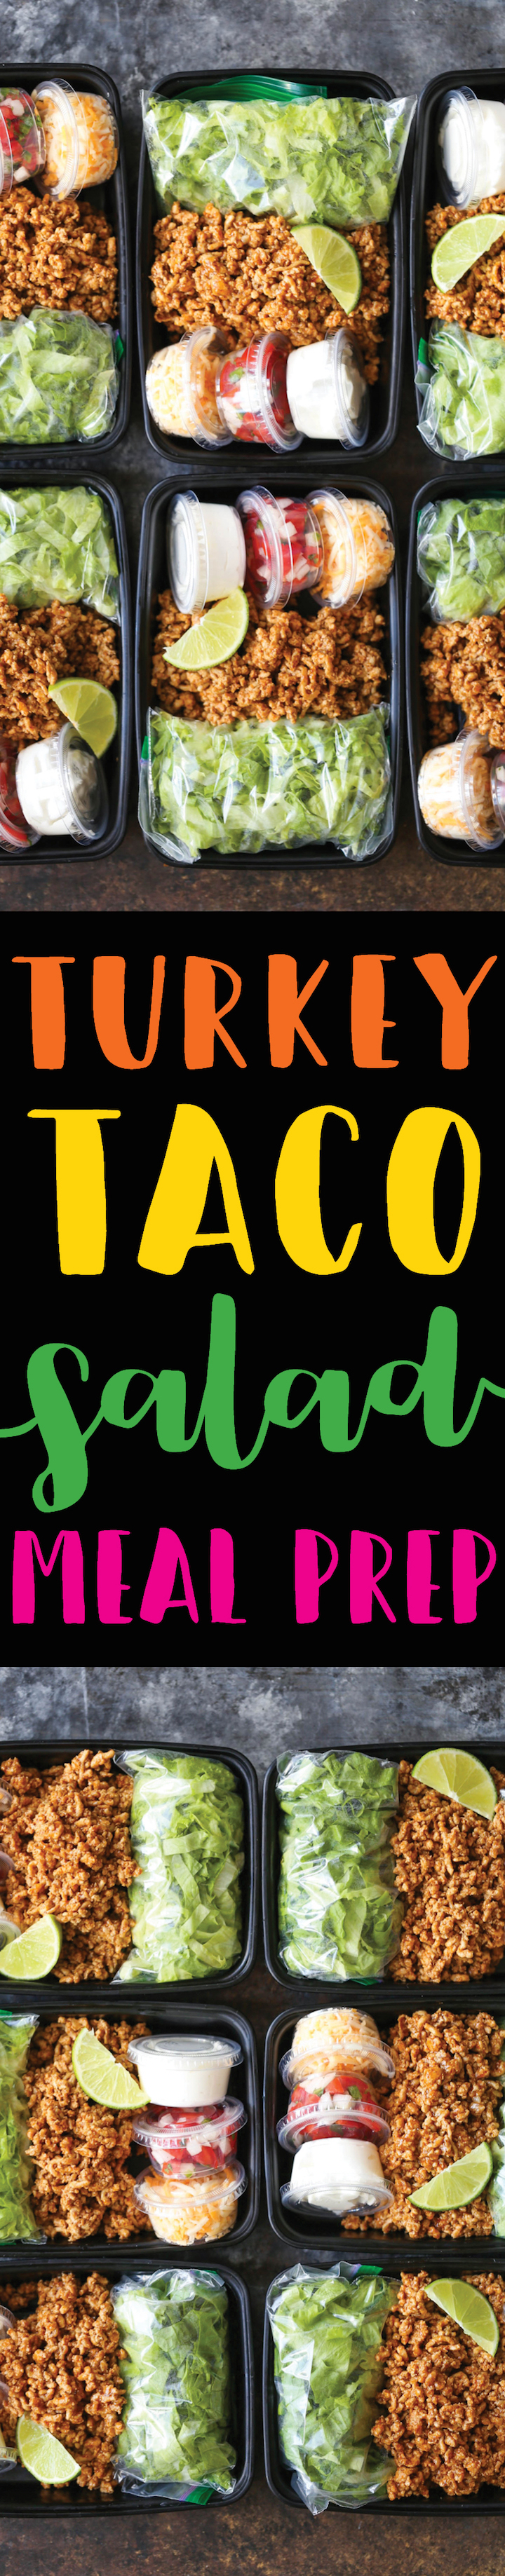 Turkey Taco Salad Meal Prep - A much HEALTHIER take on Taco Tuesdays, except you are meal prepped for the entire week! Less calories and cheaper too!